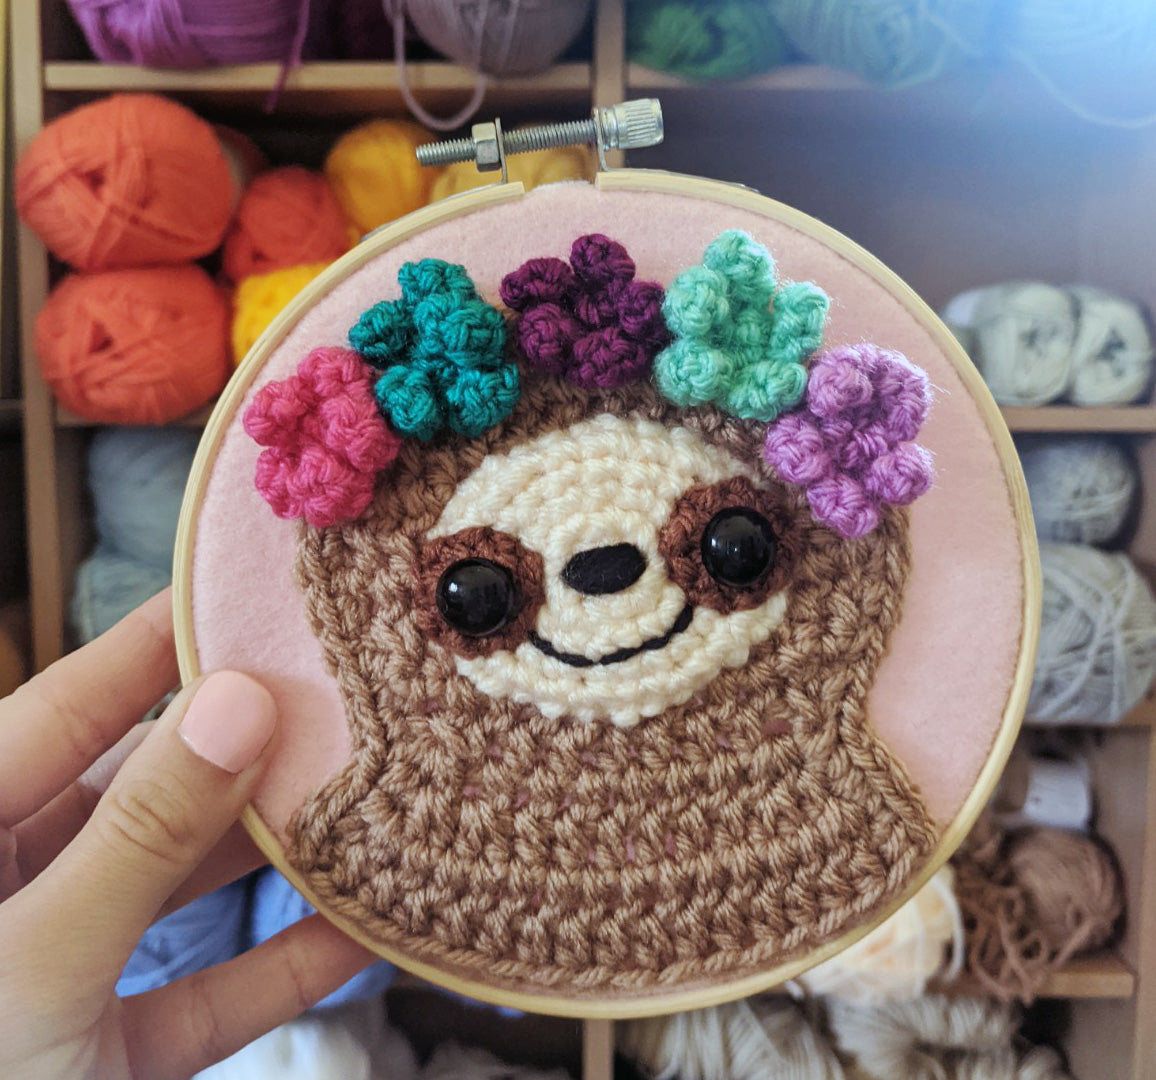 Crochet Pattern: Sloth With Flower Crown Wall Hanging